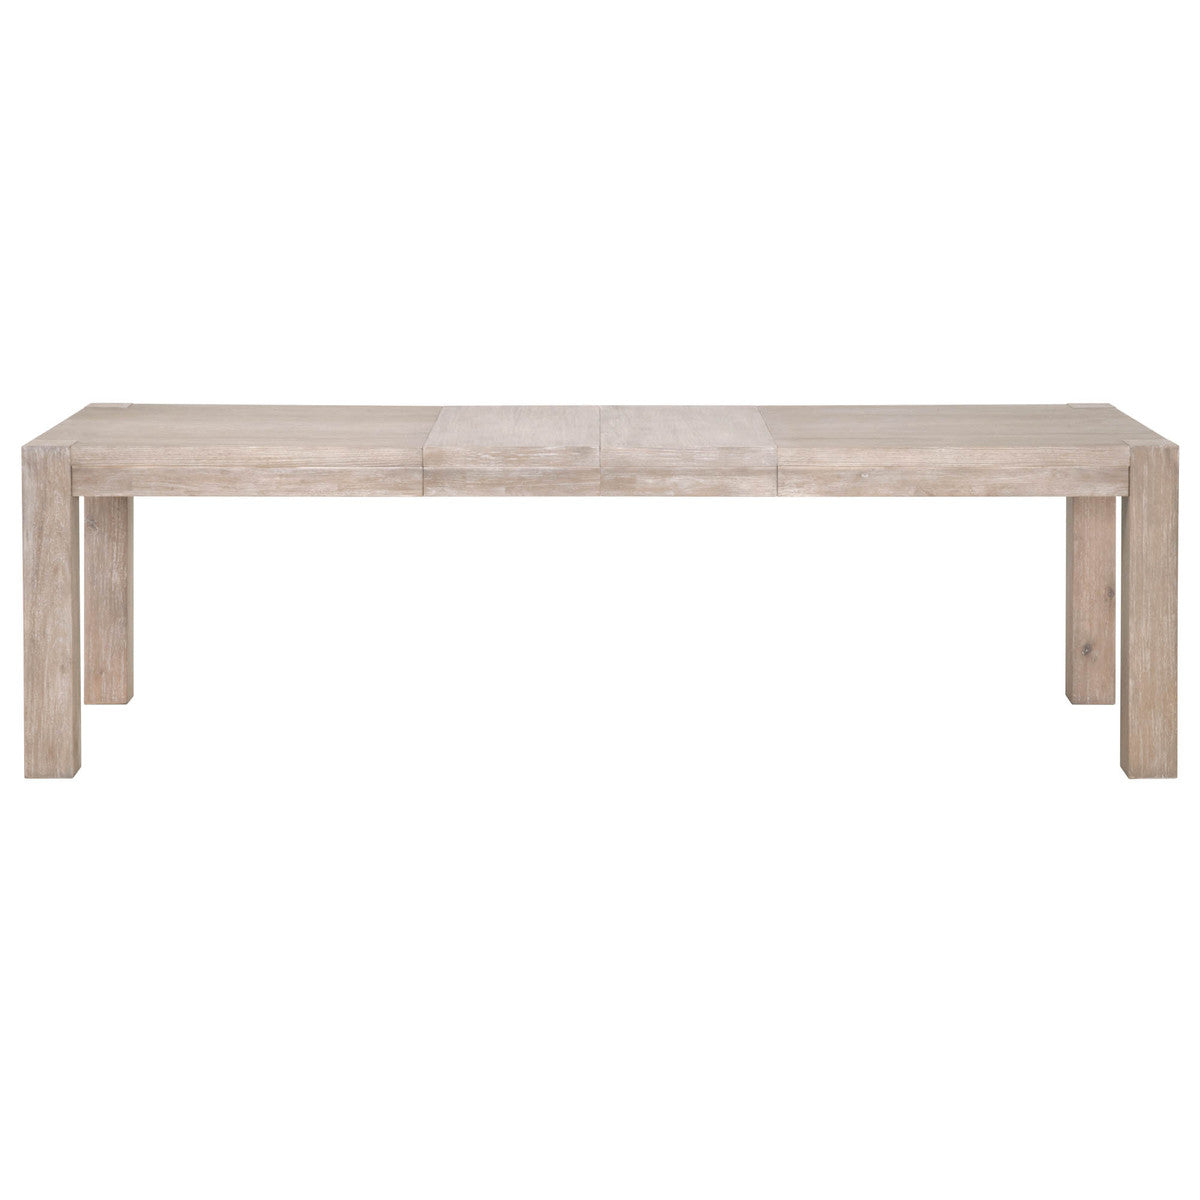 Adler Extension Dining Table- Gray Acacia